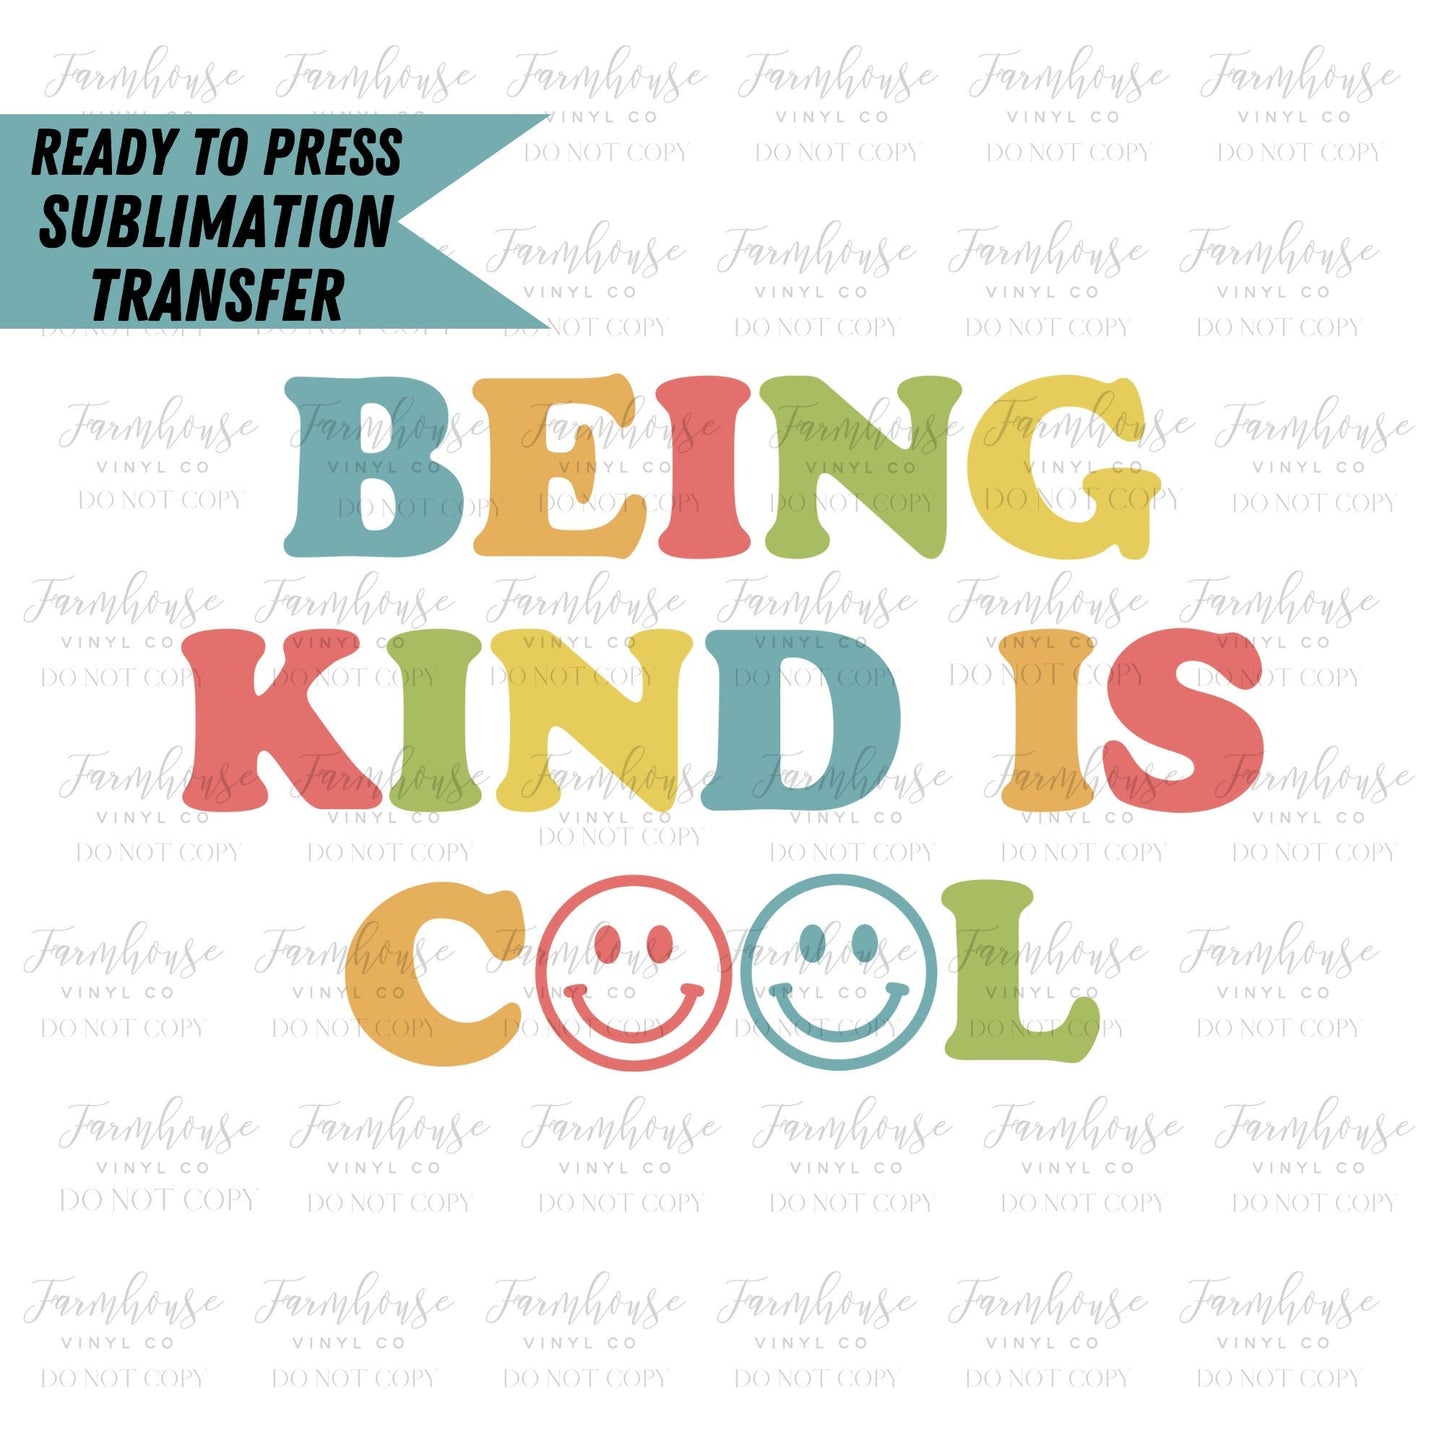 Being Kind is Cool, Ready to Press Sublimation Transfer, Sublimation Transfers, Heat Transfer, Retro Kindness Design, Teacher, Kid Design - Farmhouse Vinyl Co